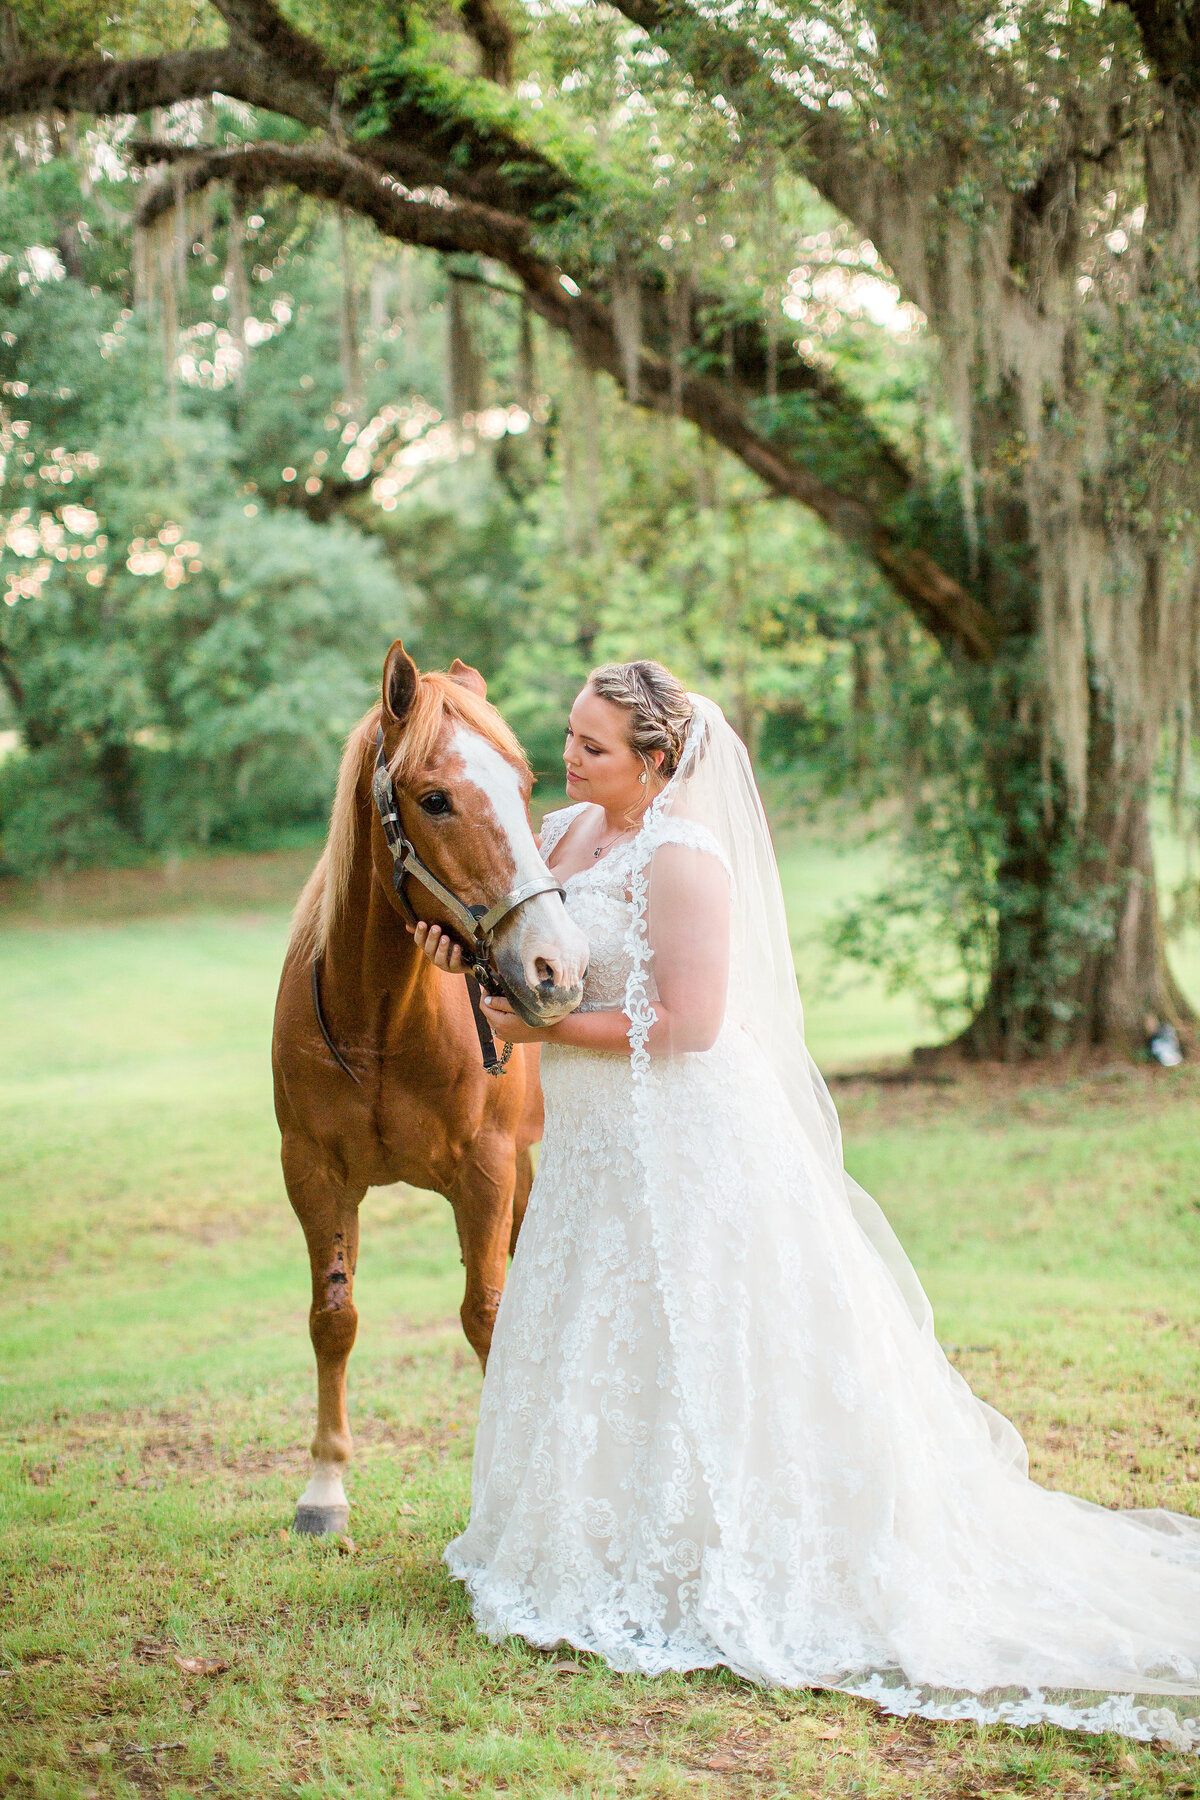 Renee Lorio Photography South Louisiana Wedding Engagement Light Airy Portrait Photographer Photos Southern Clean Colorful5